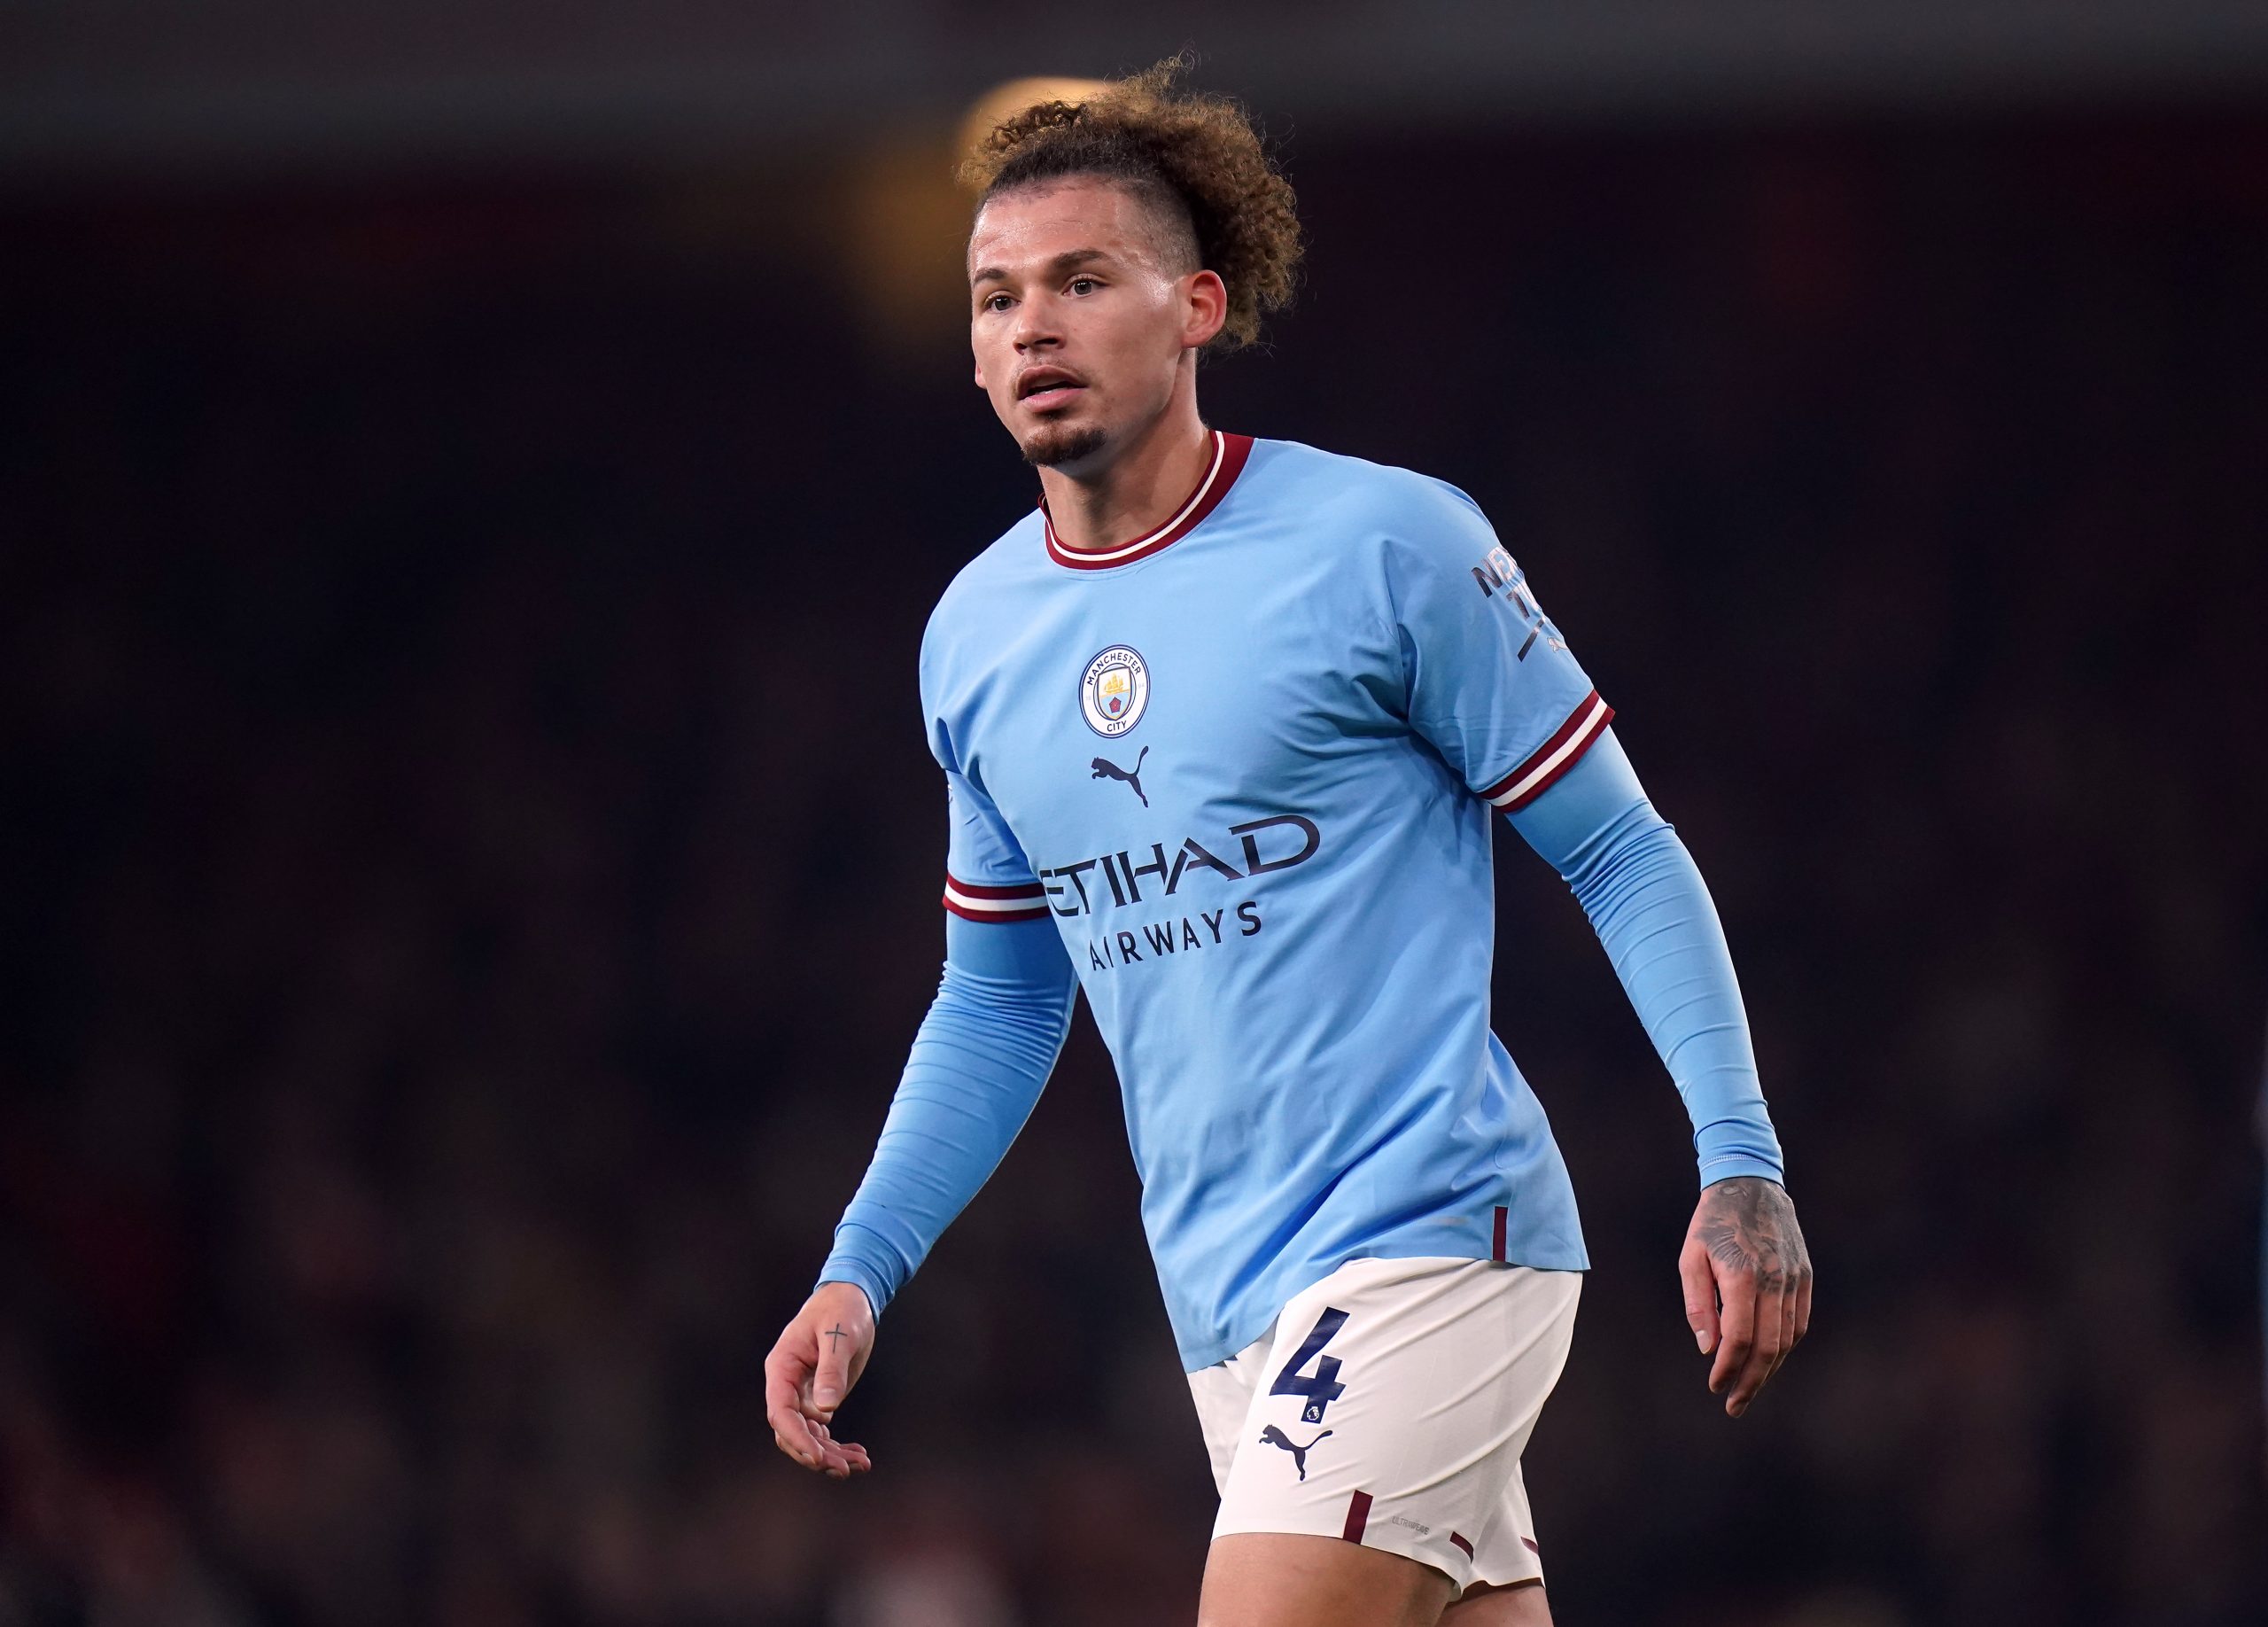 Kalvin Phillips determined to stay and fight for spot at Manchester City